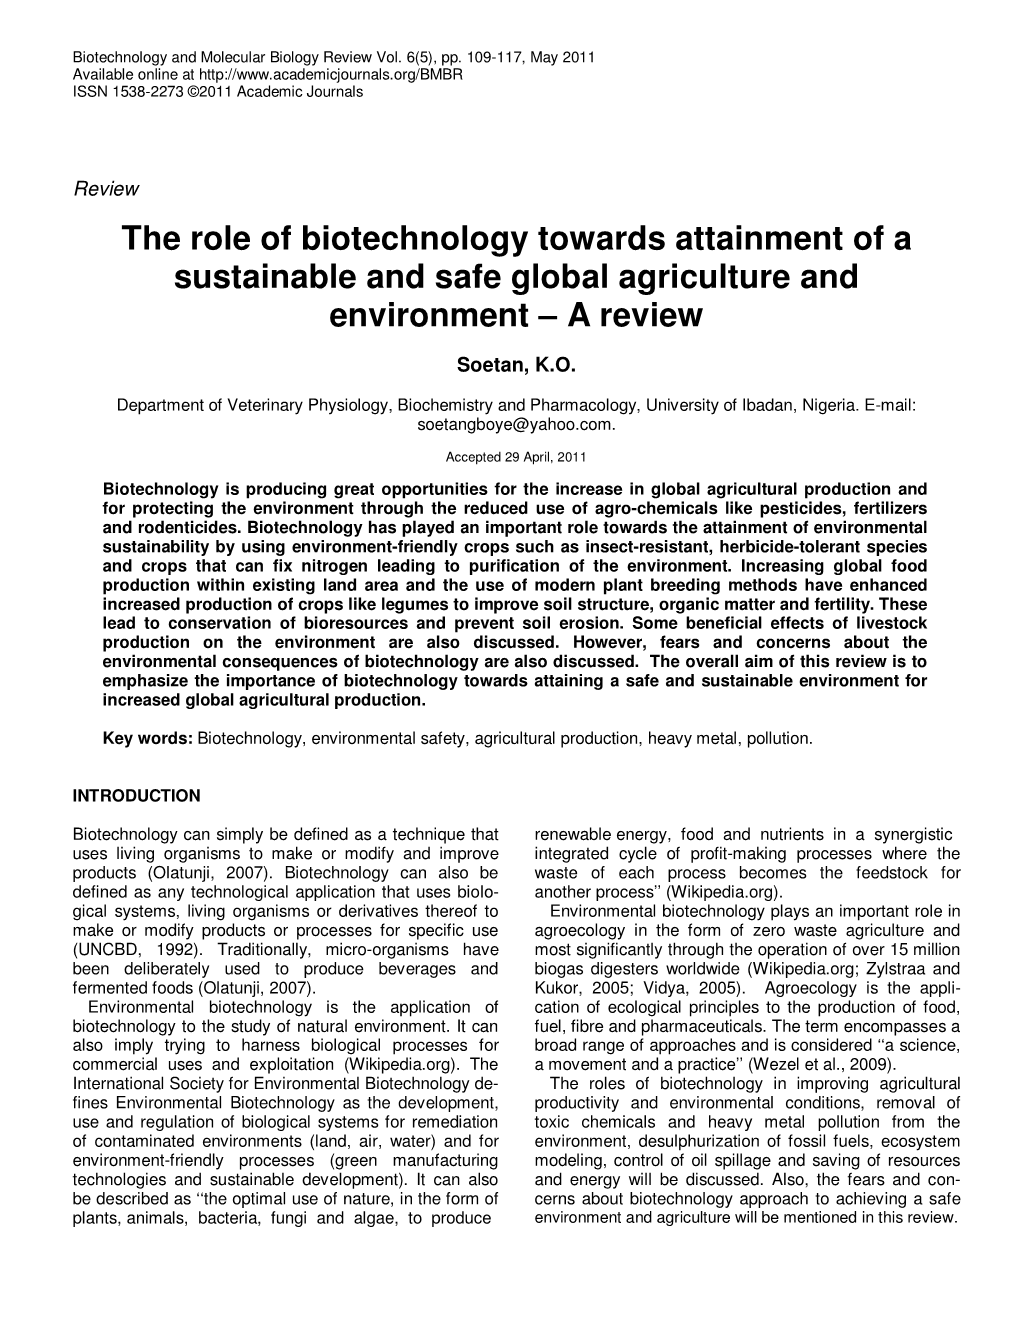 The Role of Biotechnology Towards Attainment of a Sustainable and Safe Global Agriculture and Environment – a Review